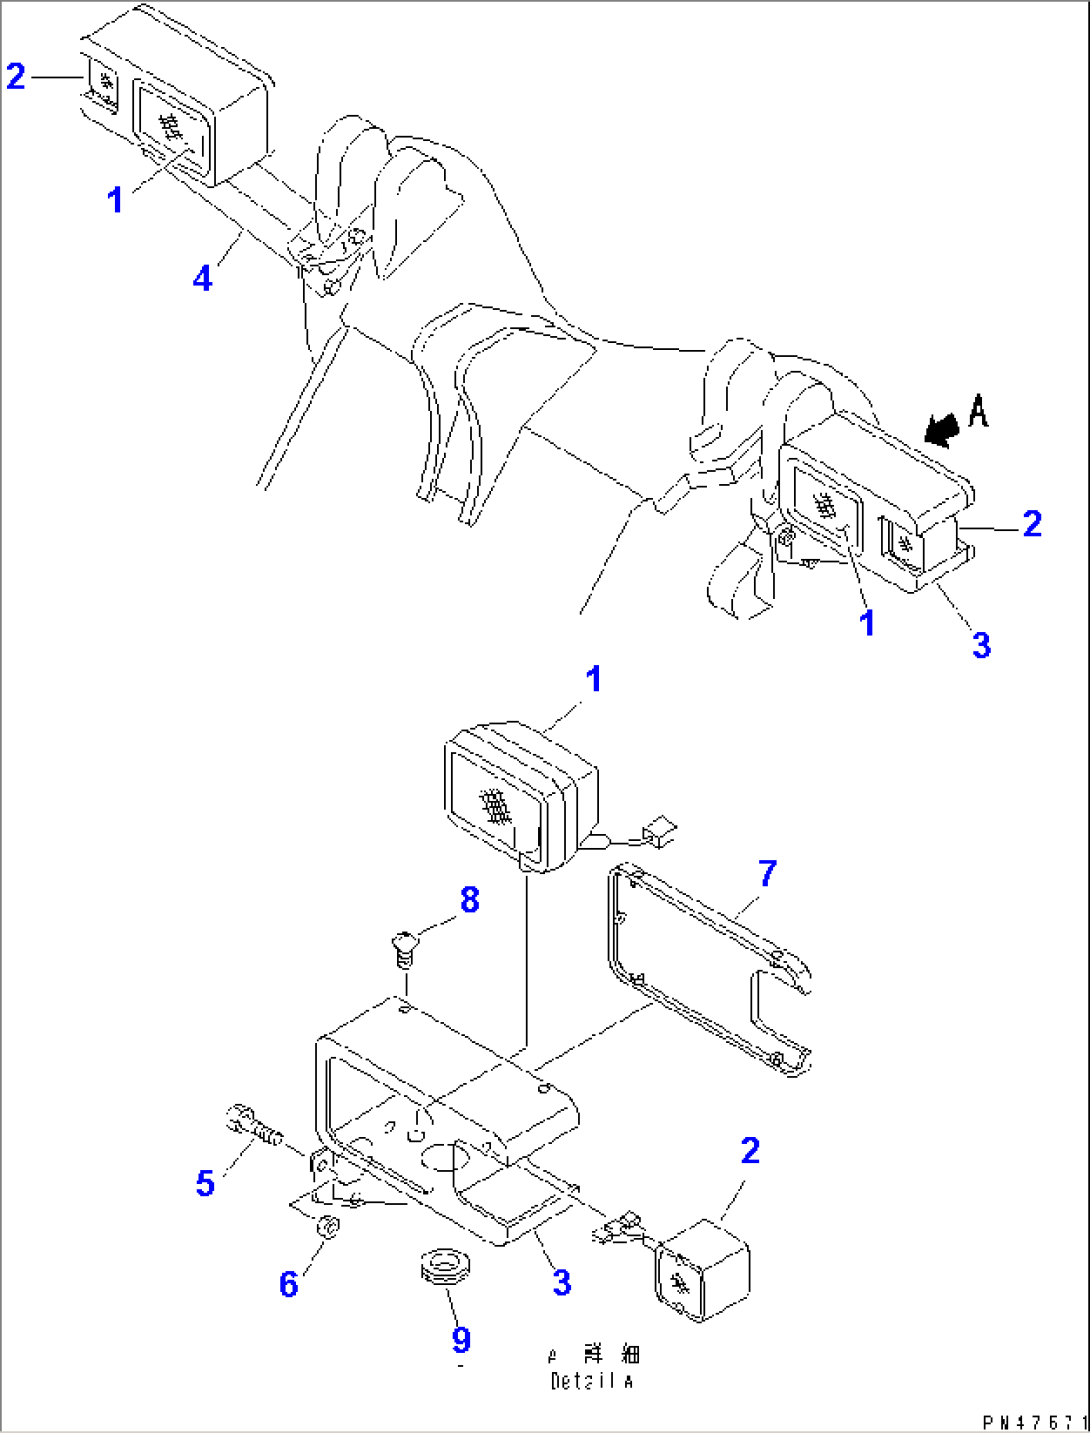 ELECTRICAL SYSTEM (FRONT LAMP)(#50001-)